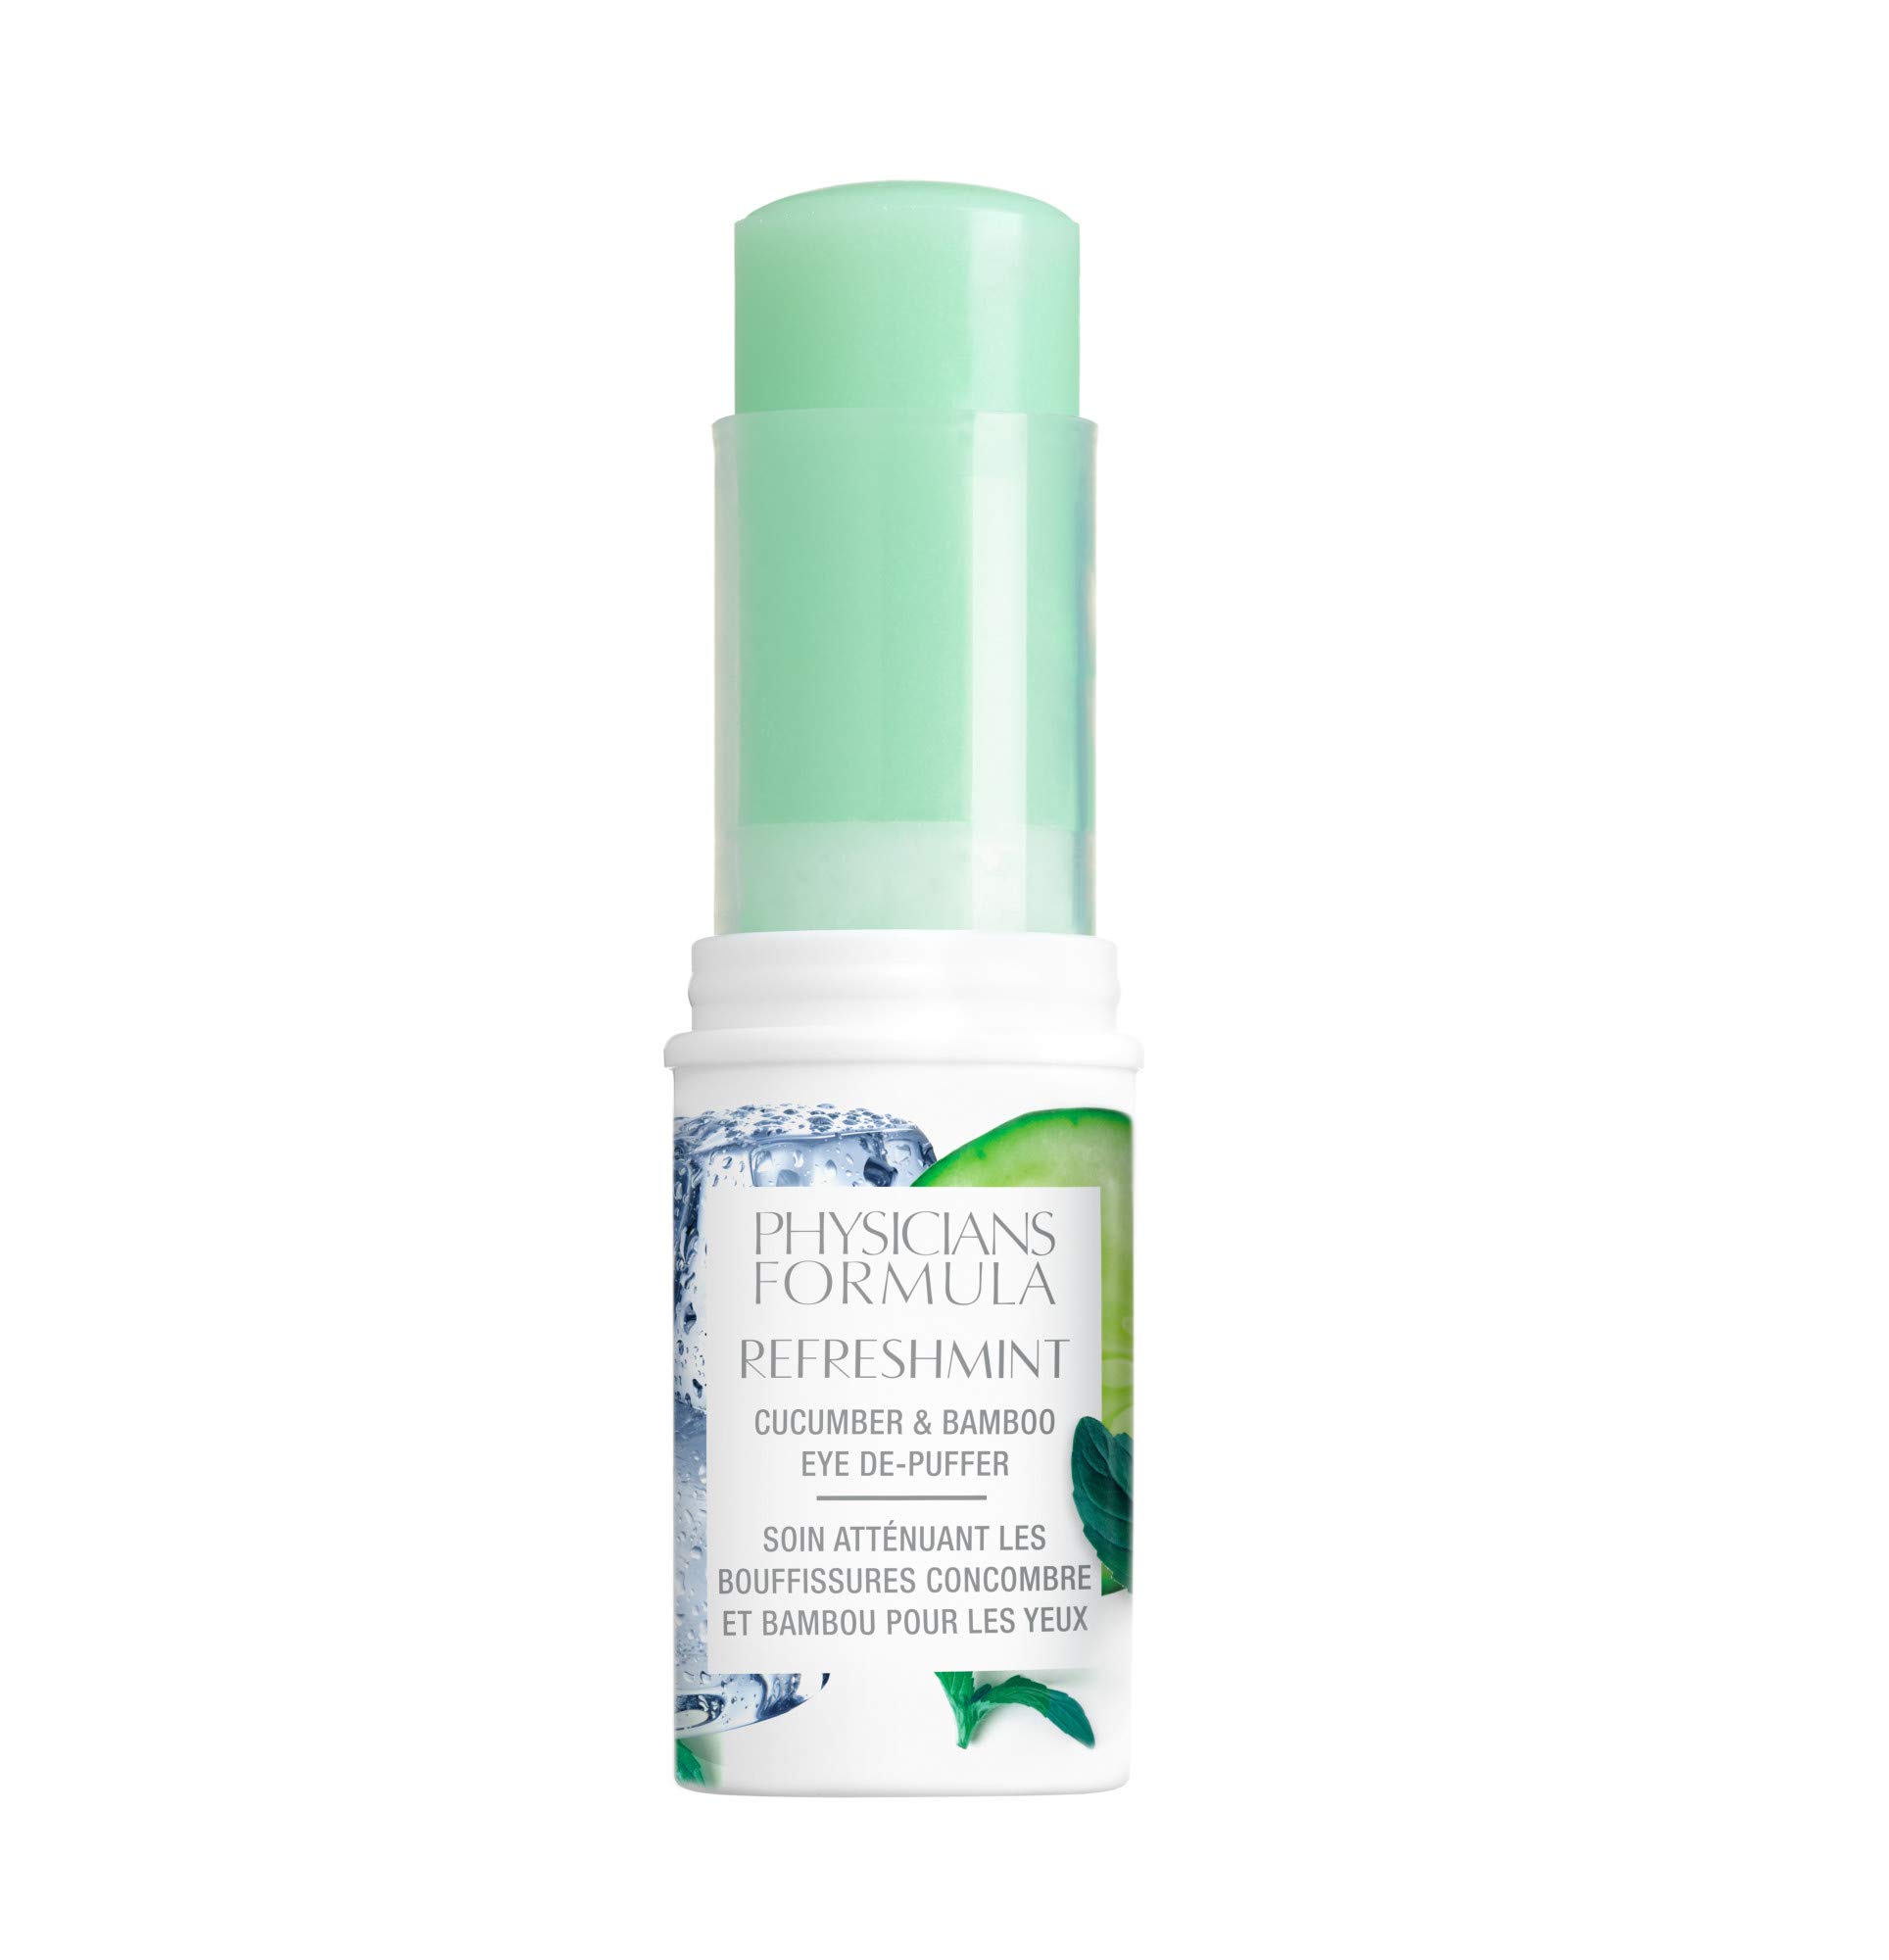 Physicians Formula RefreshMint Cucumber & Bamboo Eye De-Puffer Stick | Under Eye Cream for Dark Circles and Puffiness | Dermatologist Tested